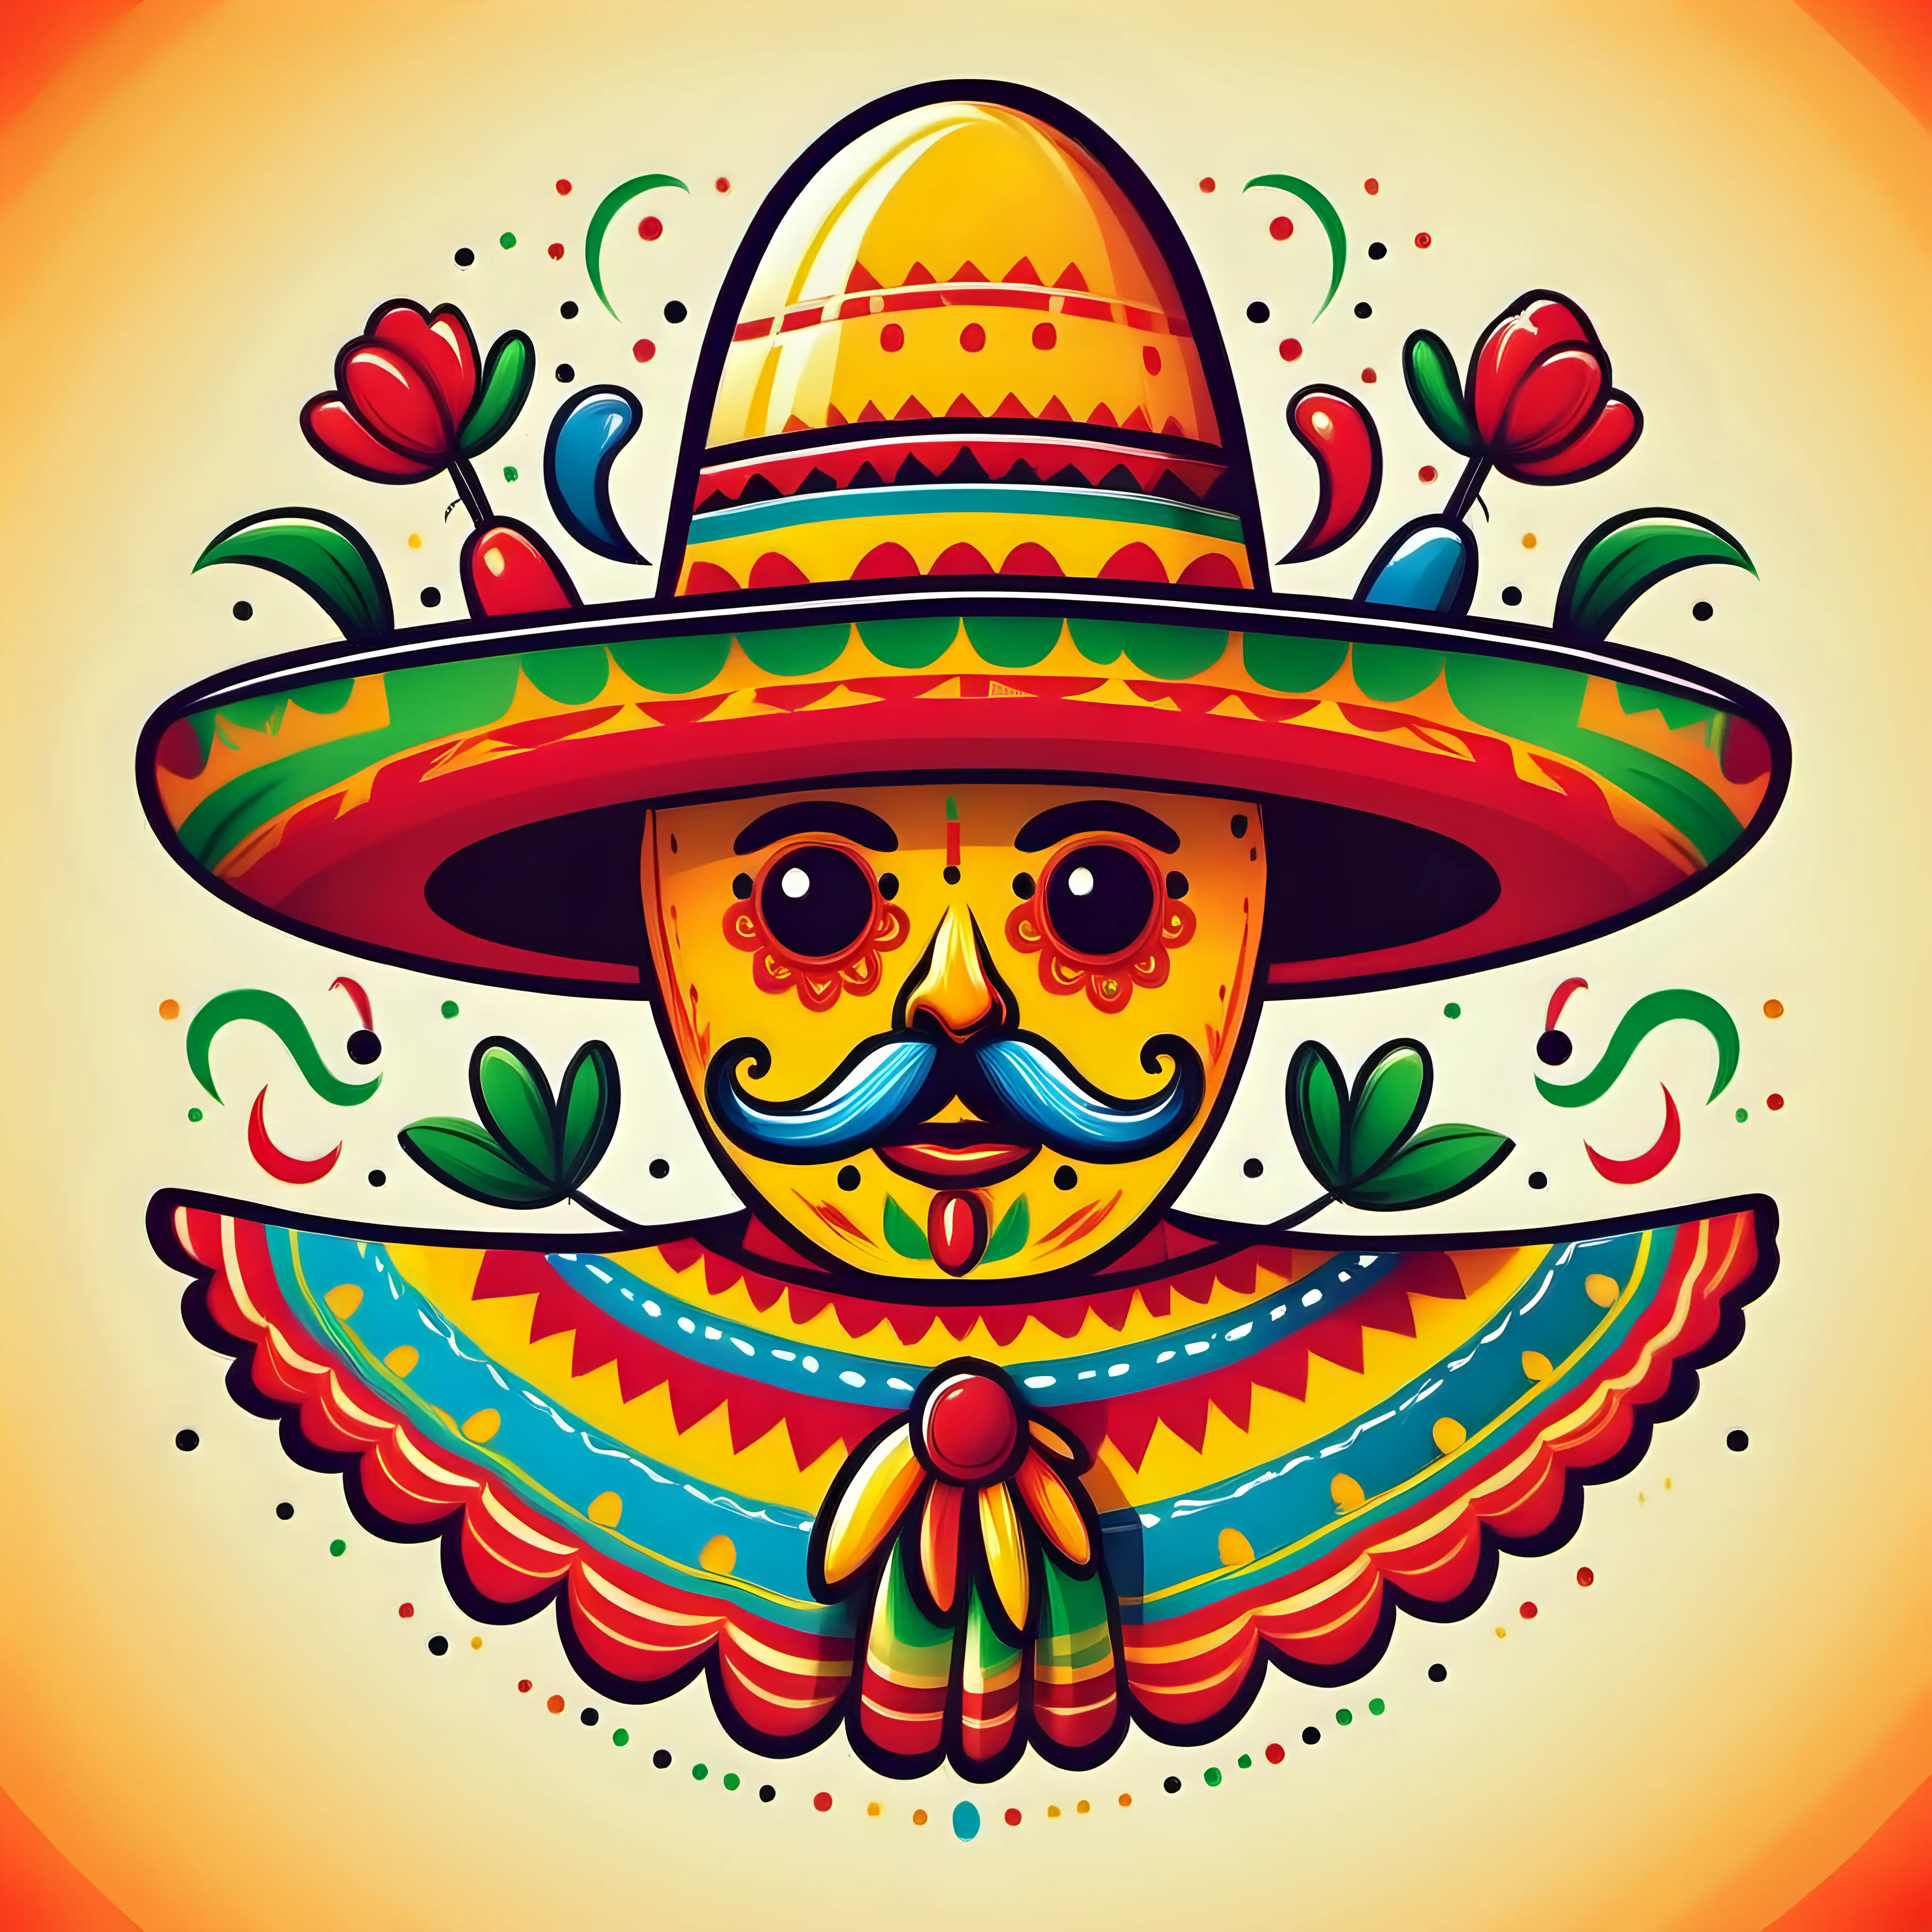 create a cinco de Mayo style image for a shirt, colorful. No text